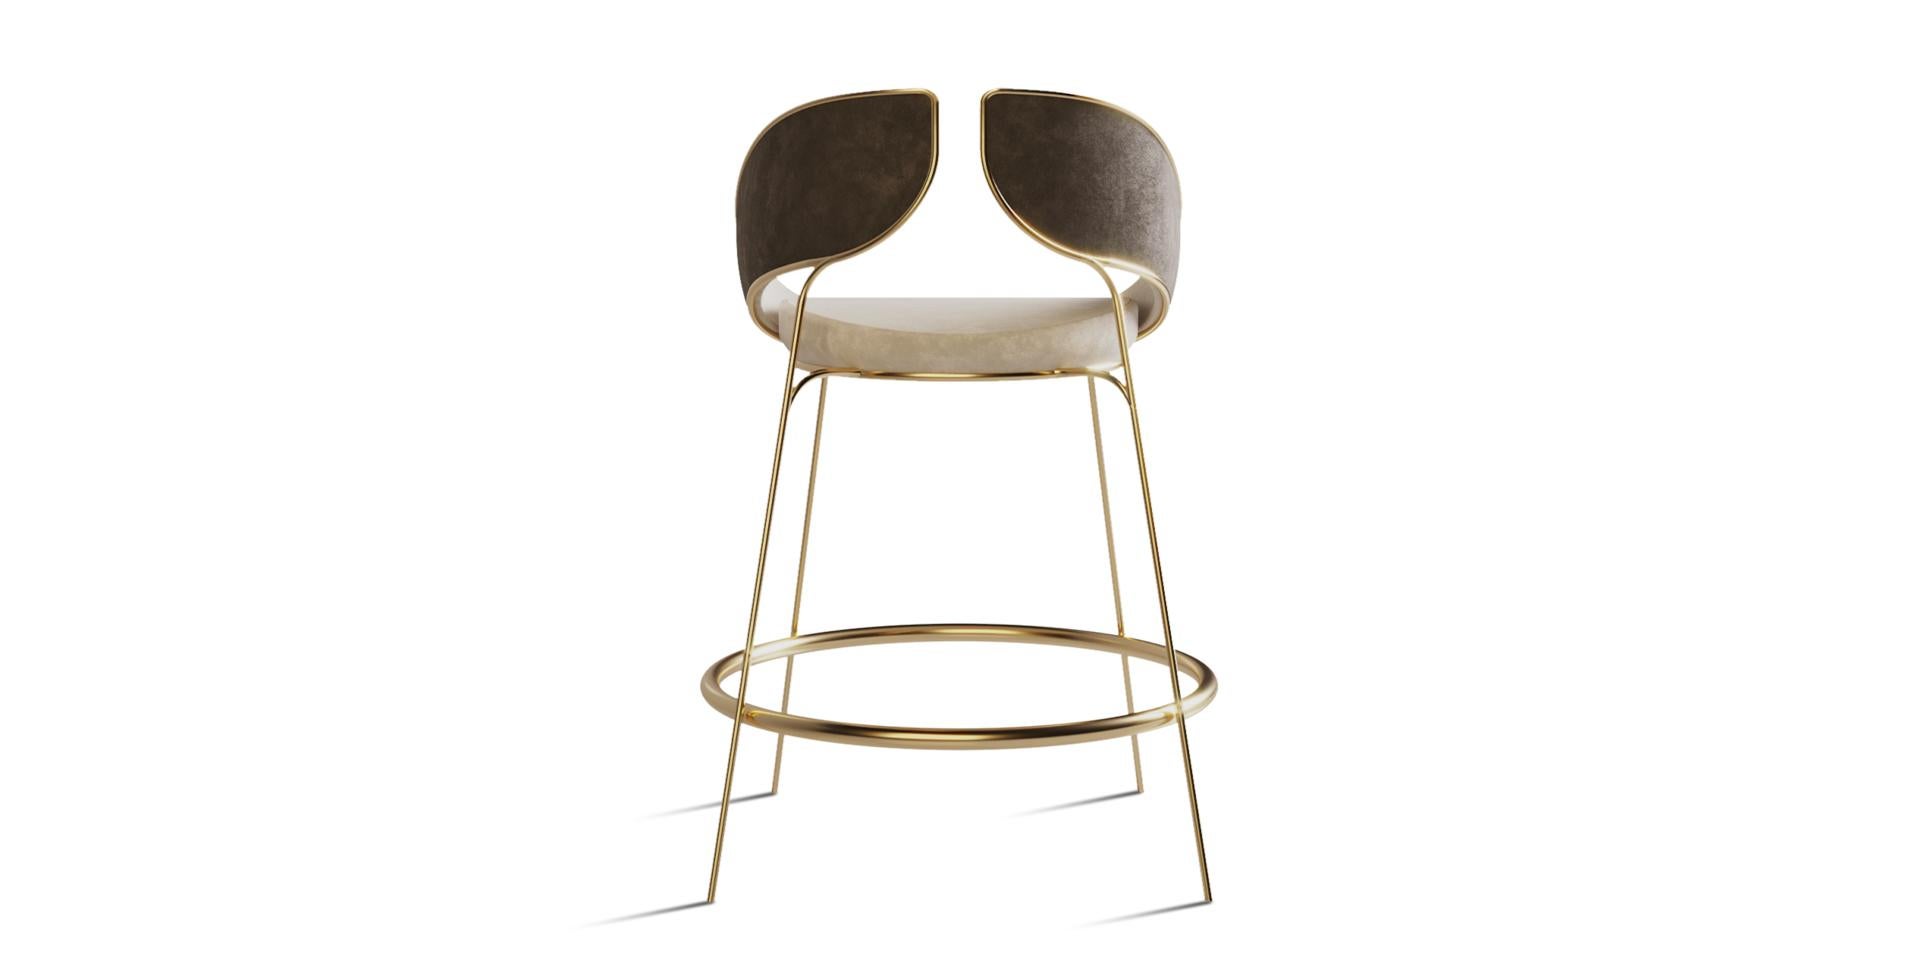 Hyoku Bar Stool is the perfect combination in style from a contemporary design to a modern interior design without being too understated. Gilded metal legs and velvet fabrics make this minimalist design a must in any restaurant or bar.